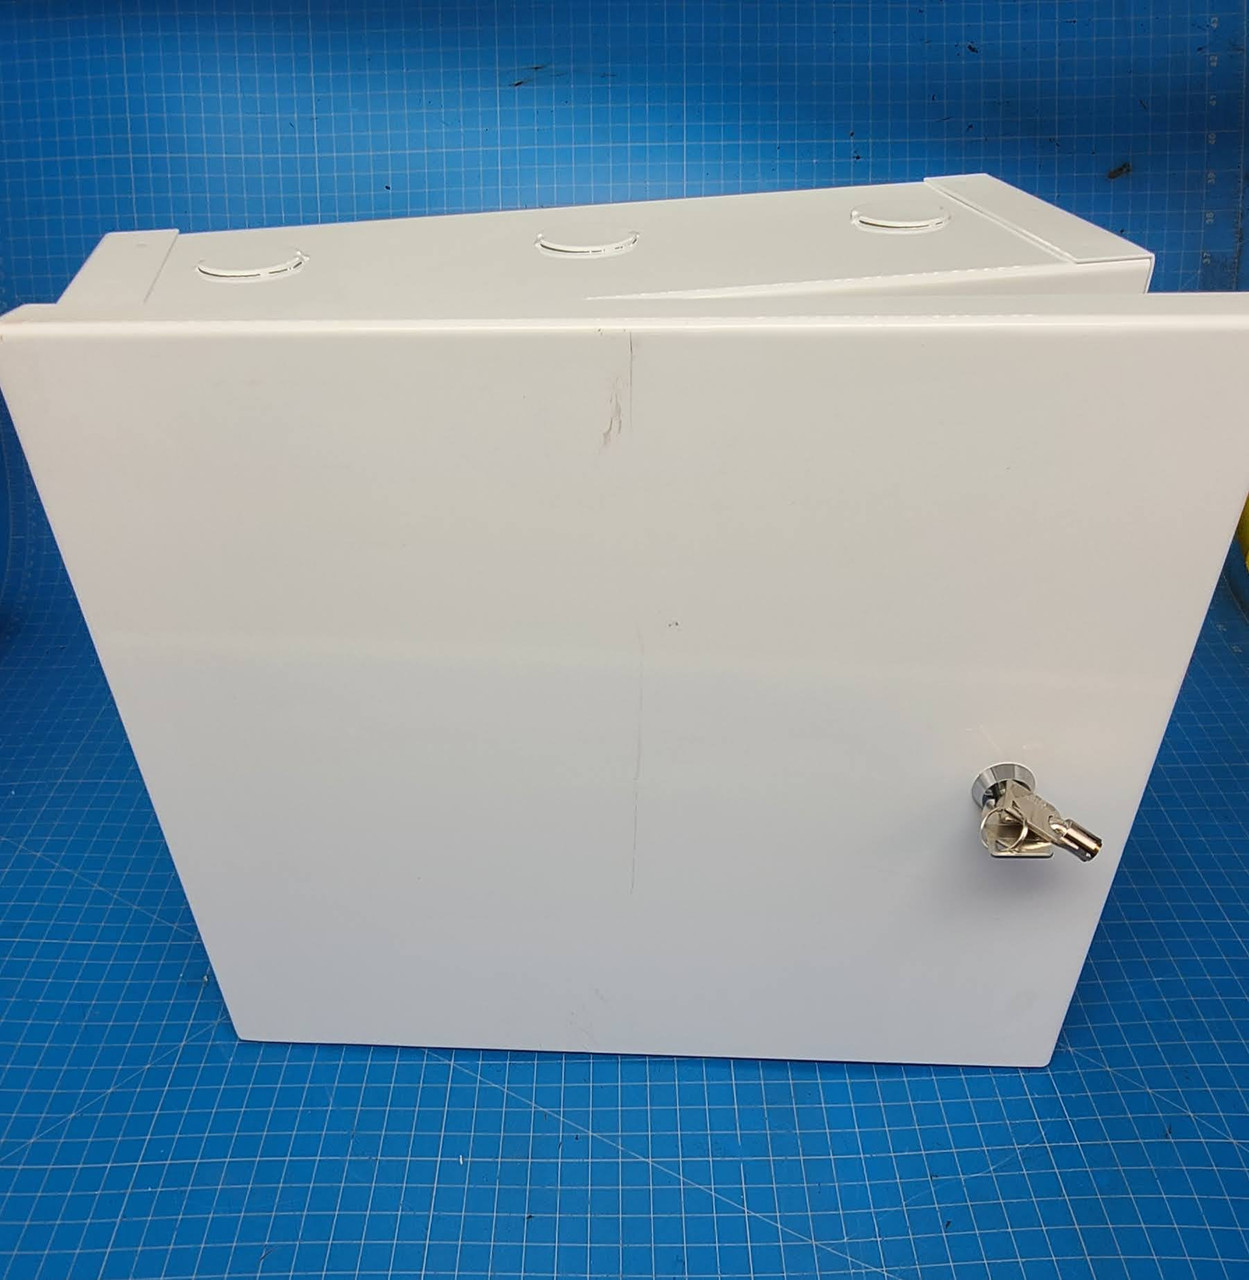 Multi-Purpose Industrial Lockable Cabinet 35 x 26 x 12 White Steel Surface Mounted (3) 1.25" KO Top and Bottom CAB143